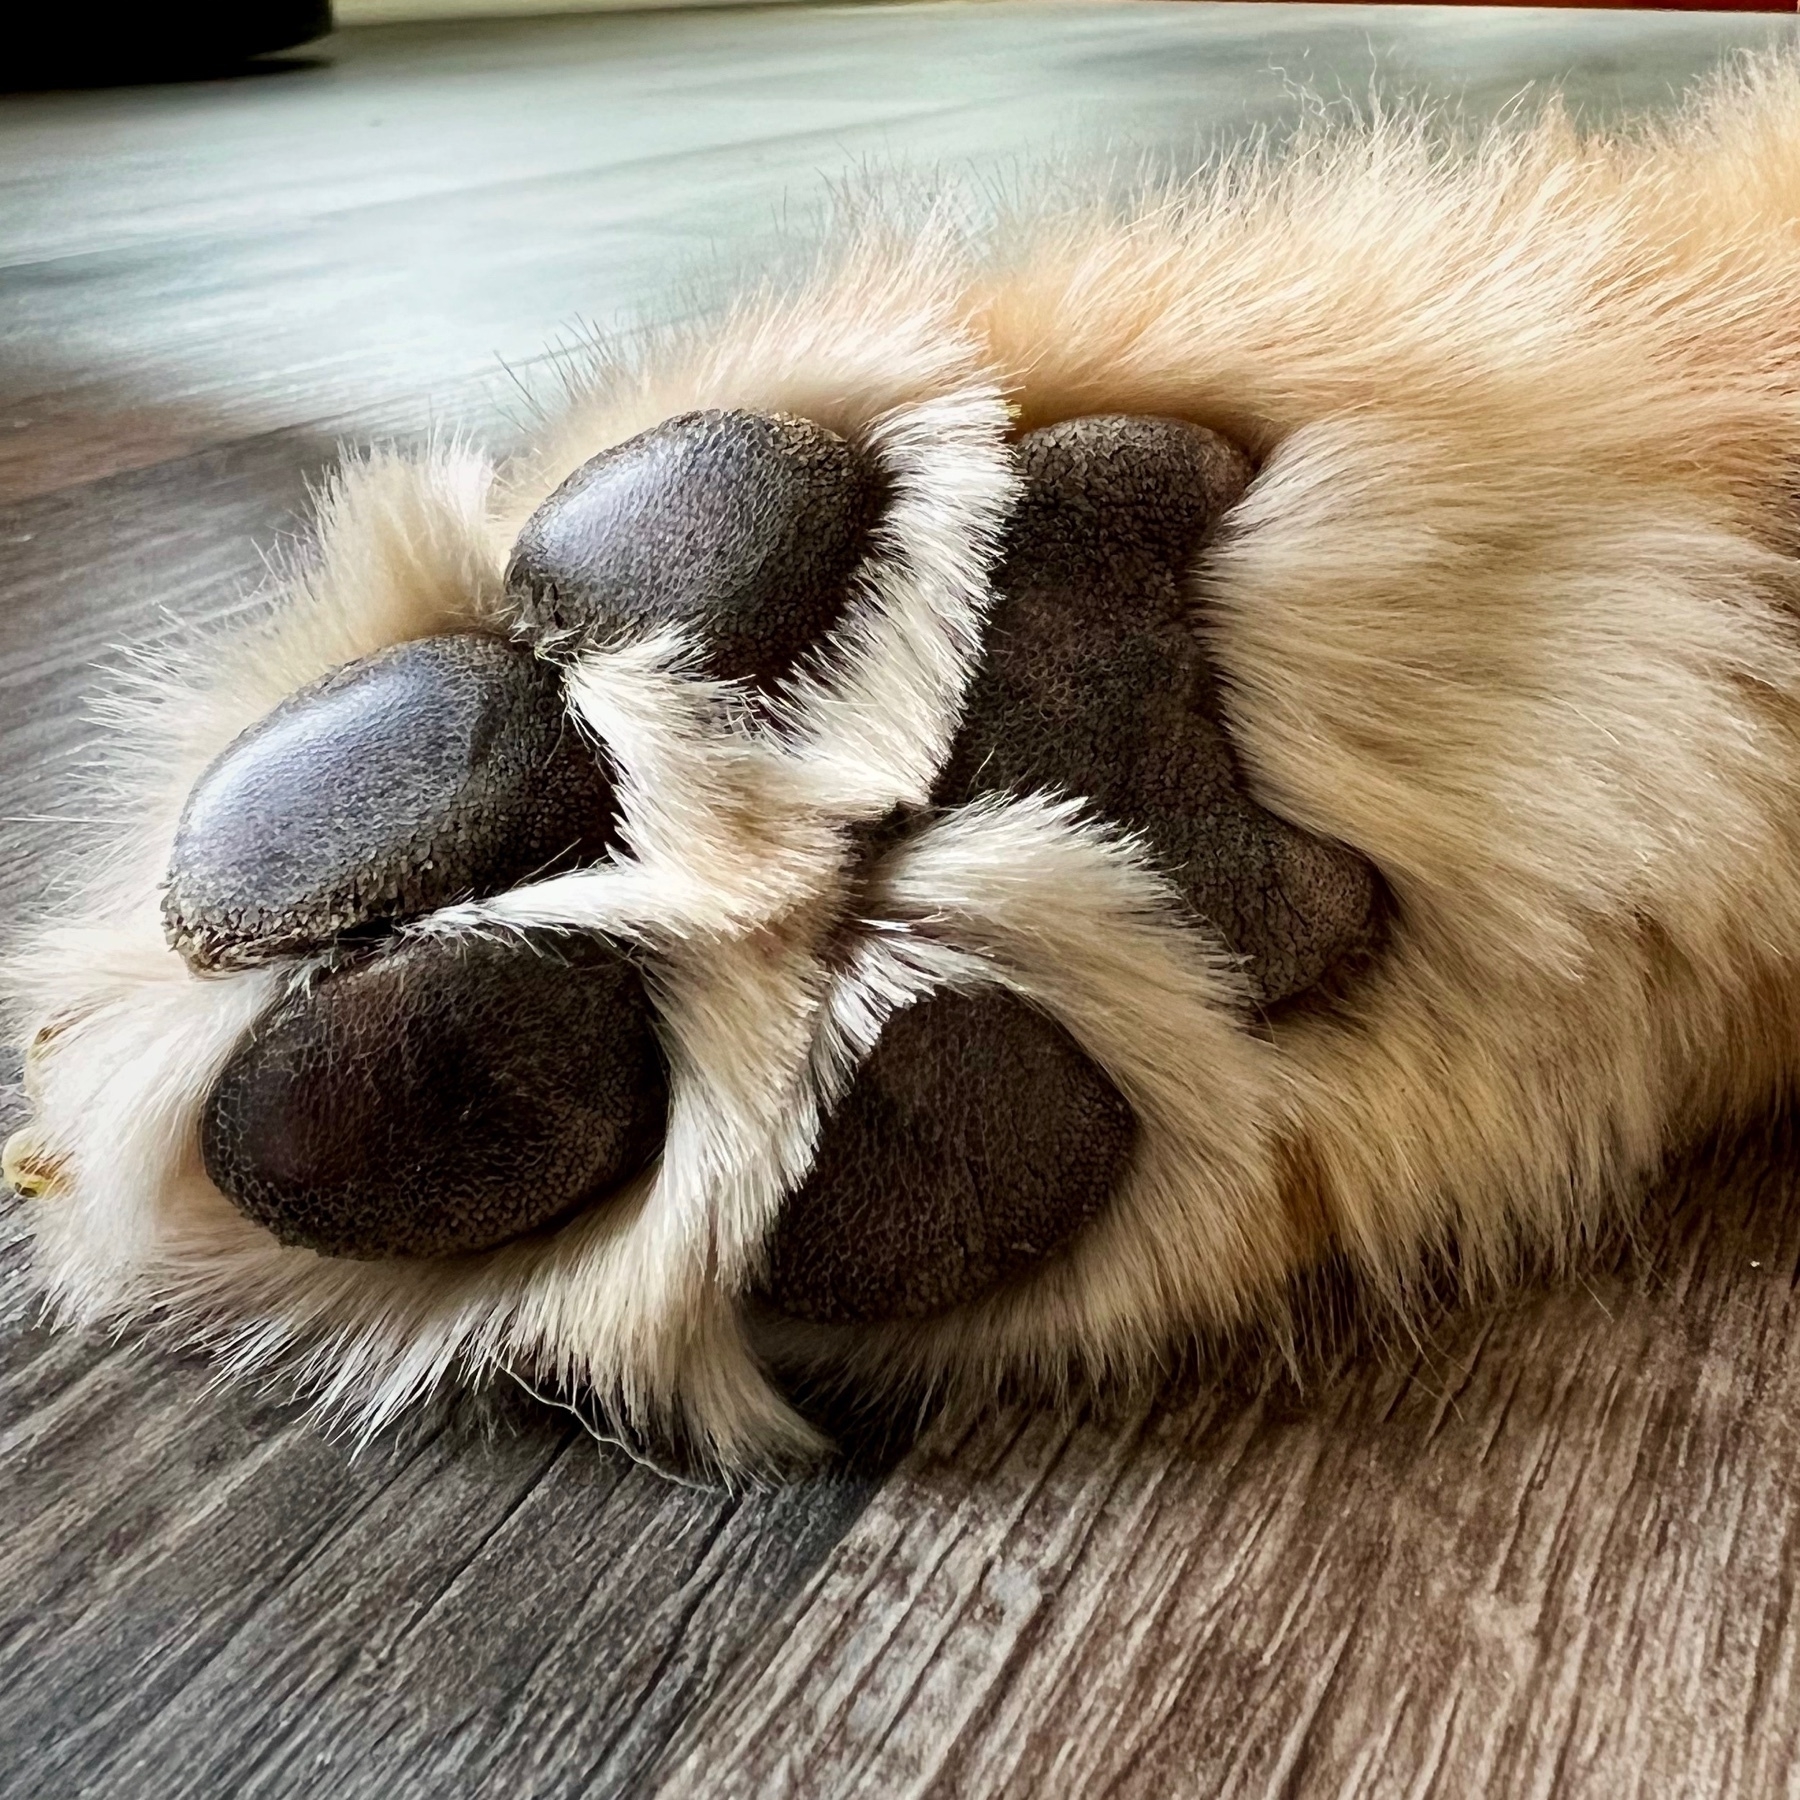 bottom of a dog's paw